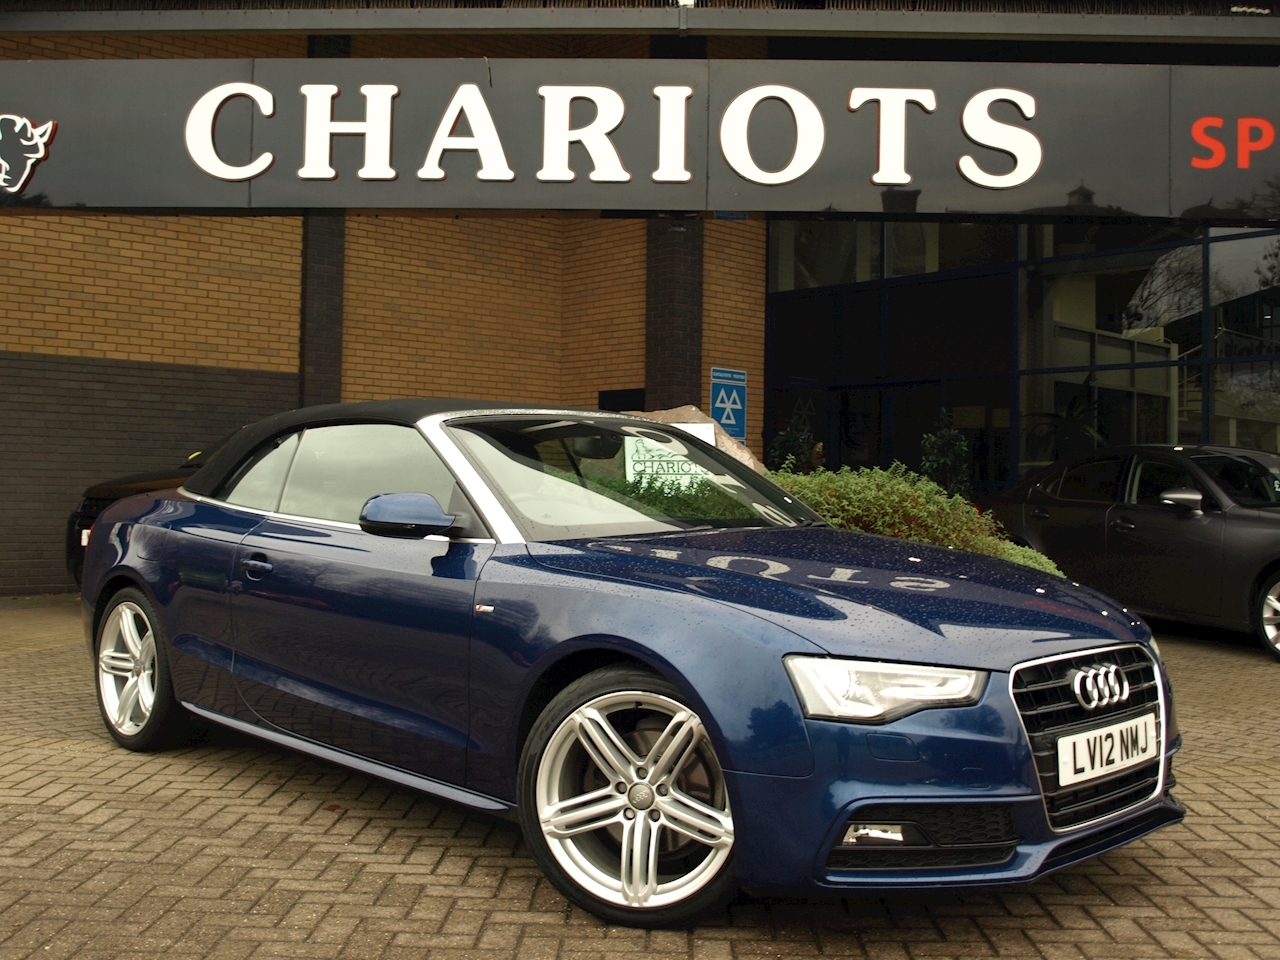 A5 S Line A5 S Line Tdi Convertible 2.0 Manual Diesel